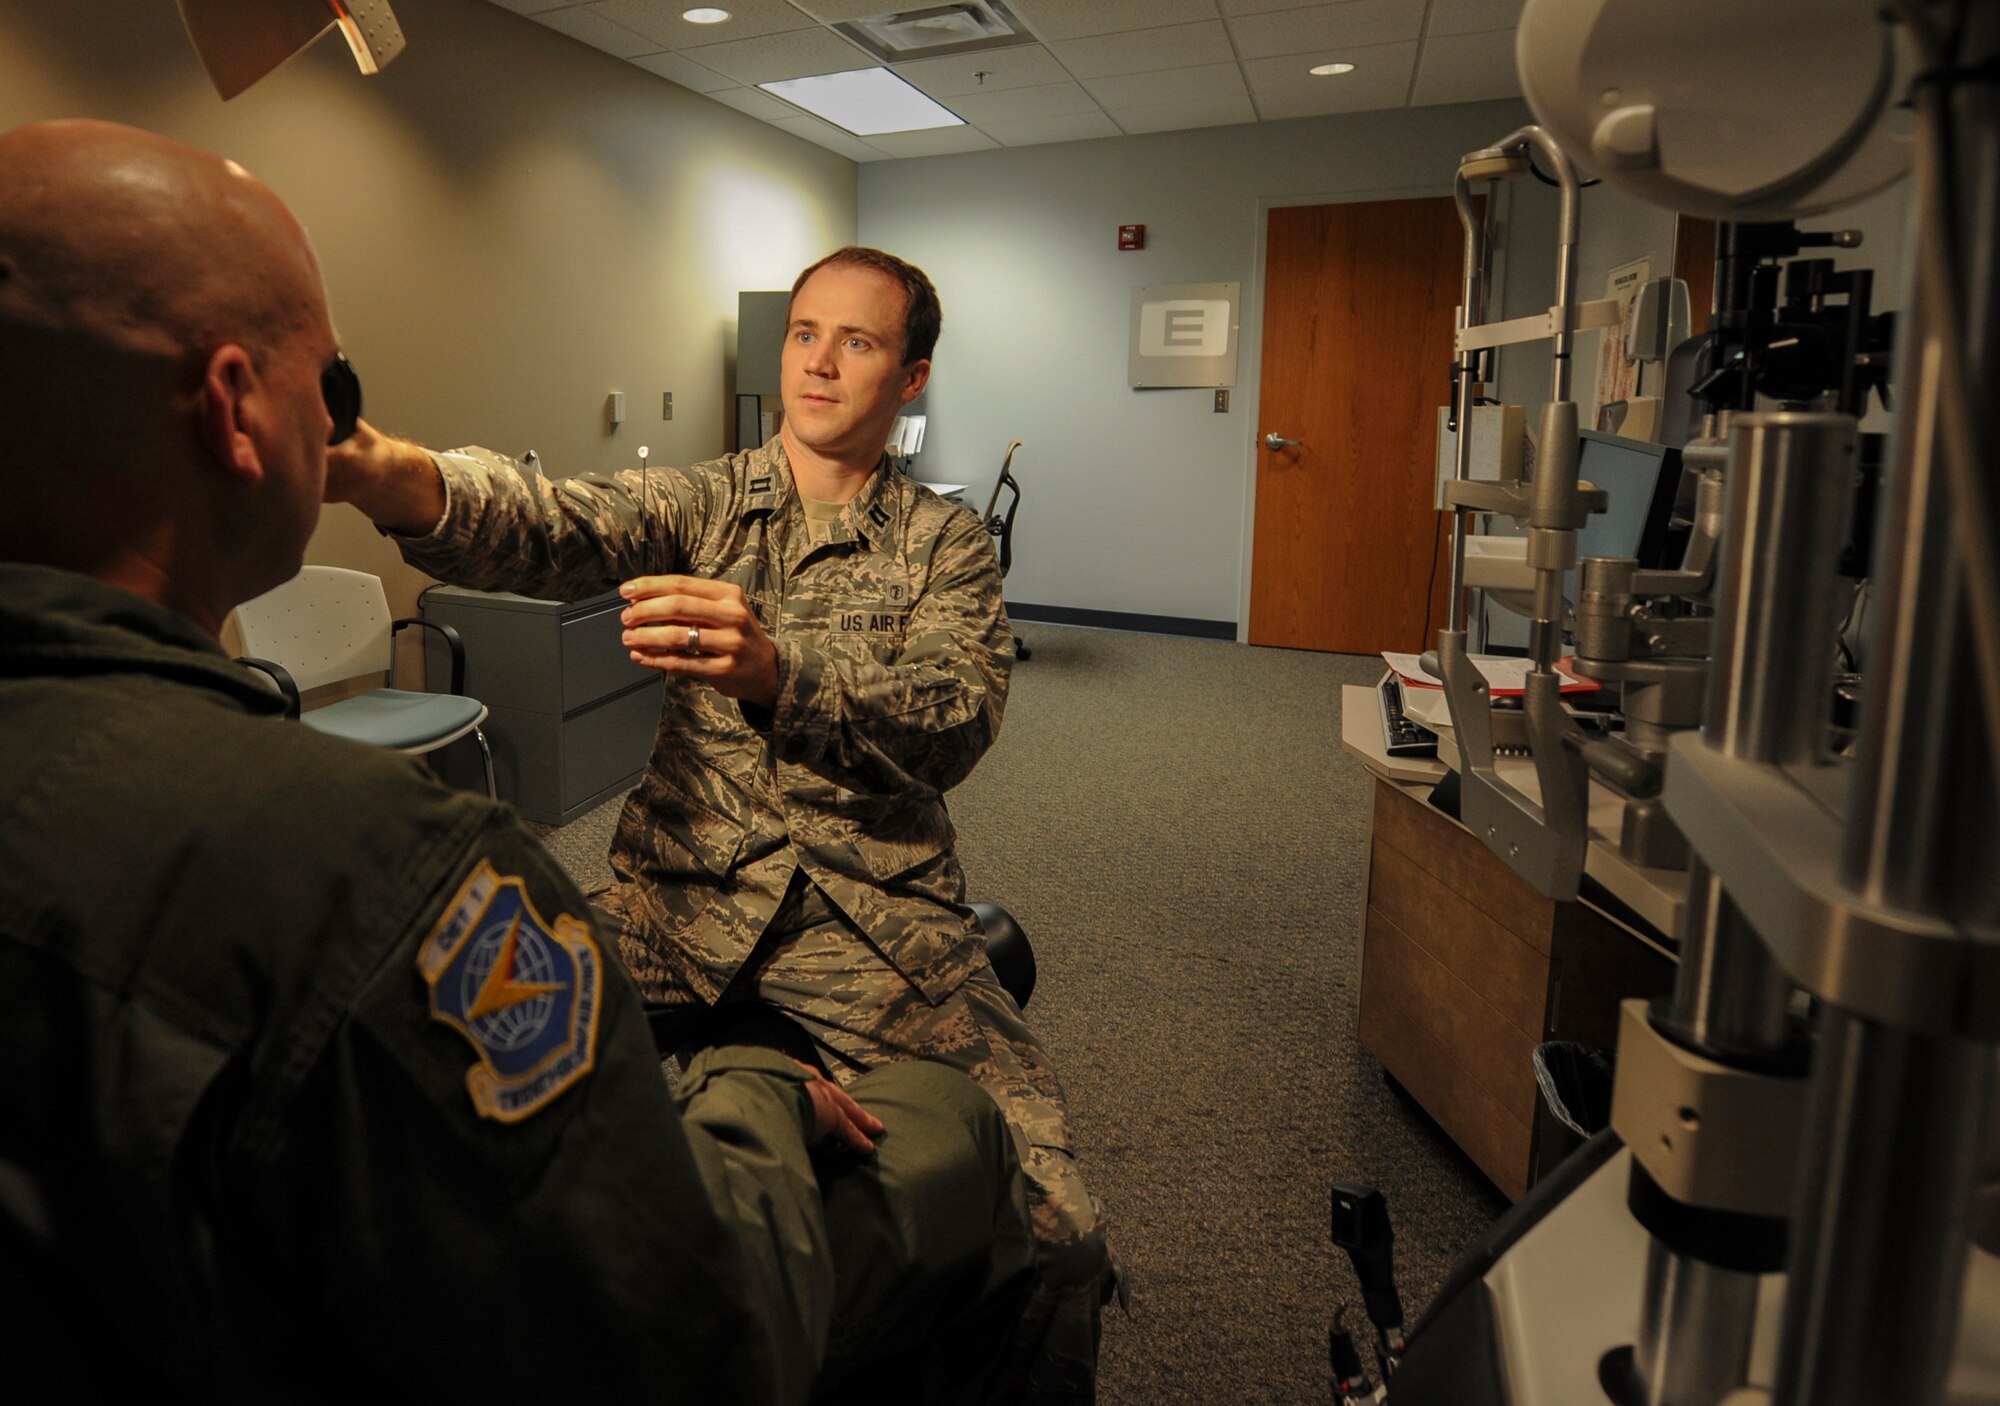 Capt. Cody Peterson, a 19th Aerospace Medicine Squadron optometrist, examines a patient’s eyesight to determine whether or not glasses will be required June 30, 2014, at Little Rock Air Force Base, Ark. Approximately 500 eye examinations are performed by the 19th Medical Group optometry team each month. (U.S. Air Force photo by Airman 1st Class Harry Brexel)